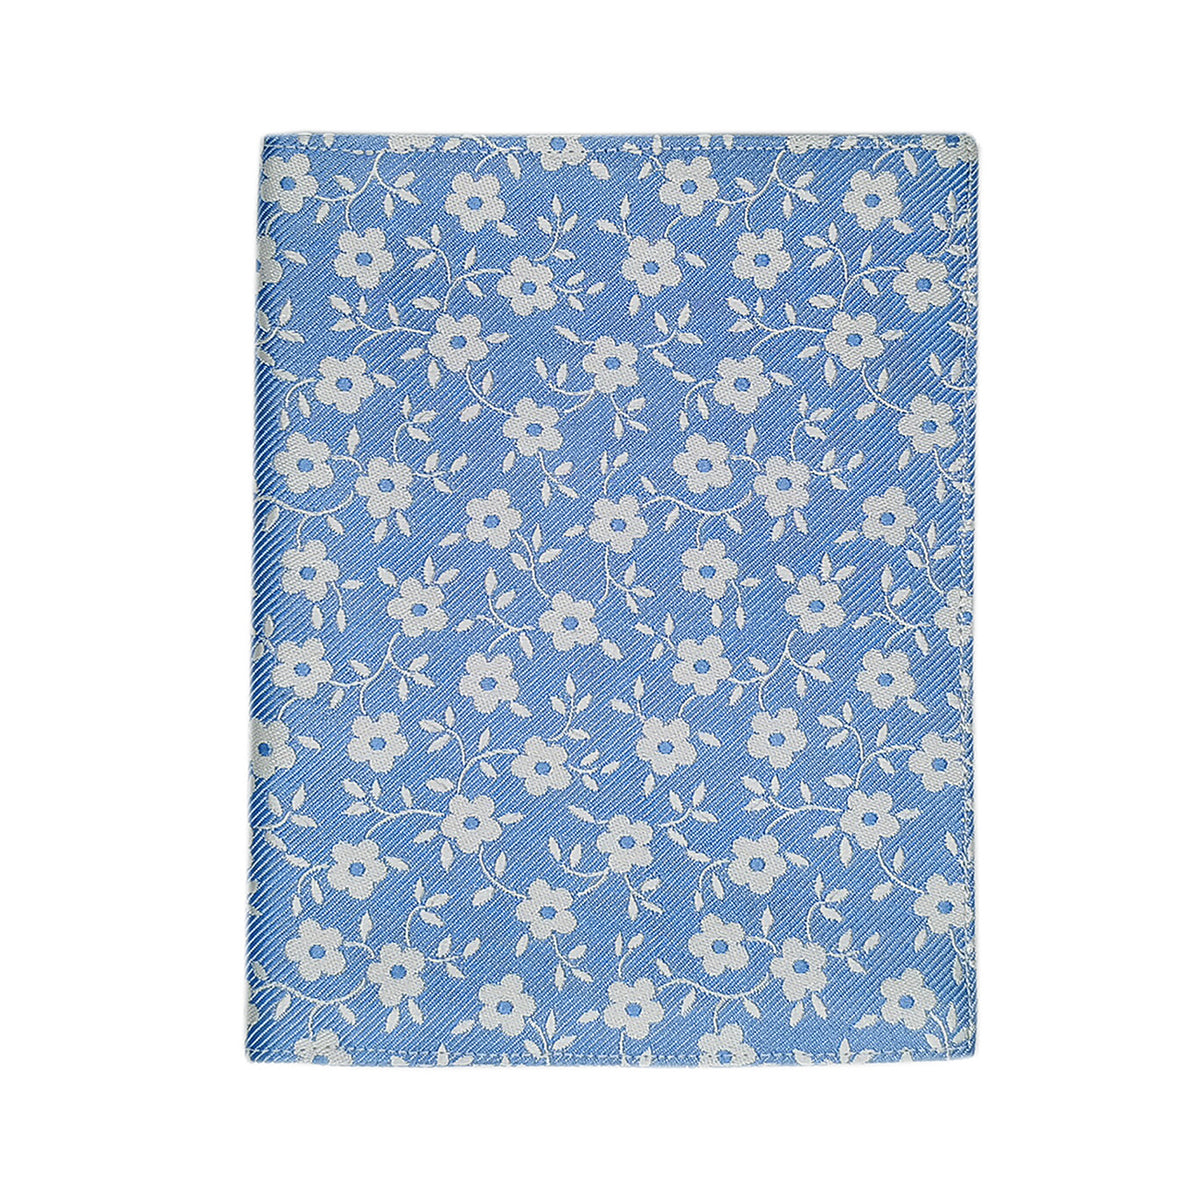 Document holder light blue background and white flowers. Finamore 1925